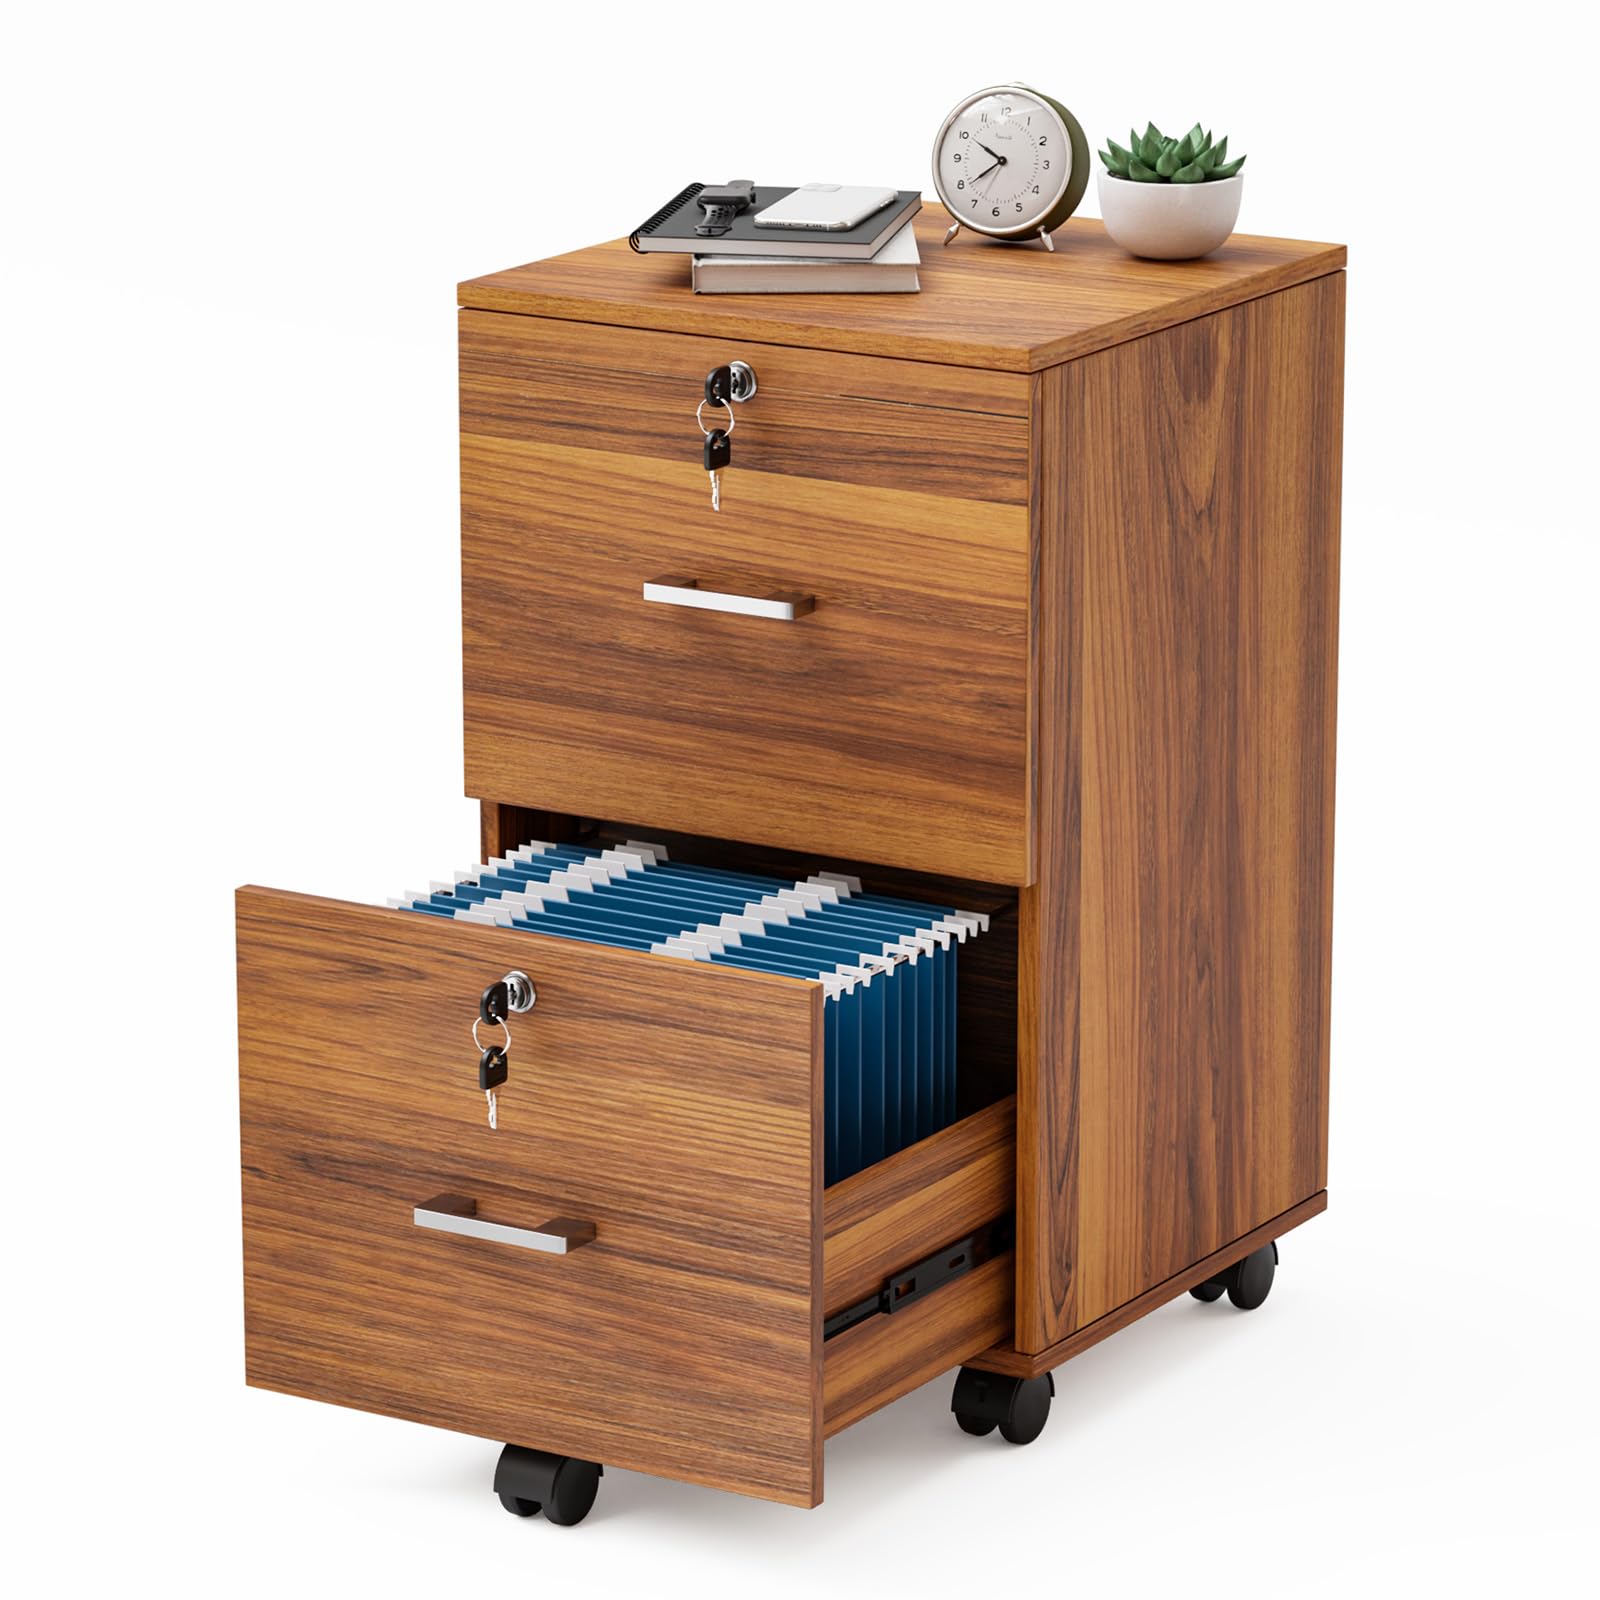 Rolling Two Drawer Vertical Filing Cabinet with Lock and Storage